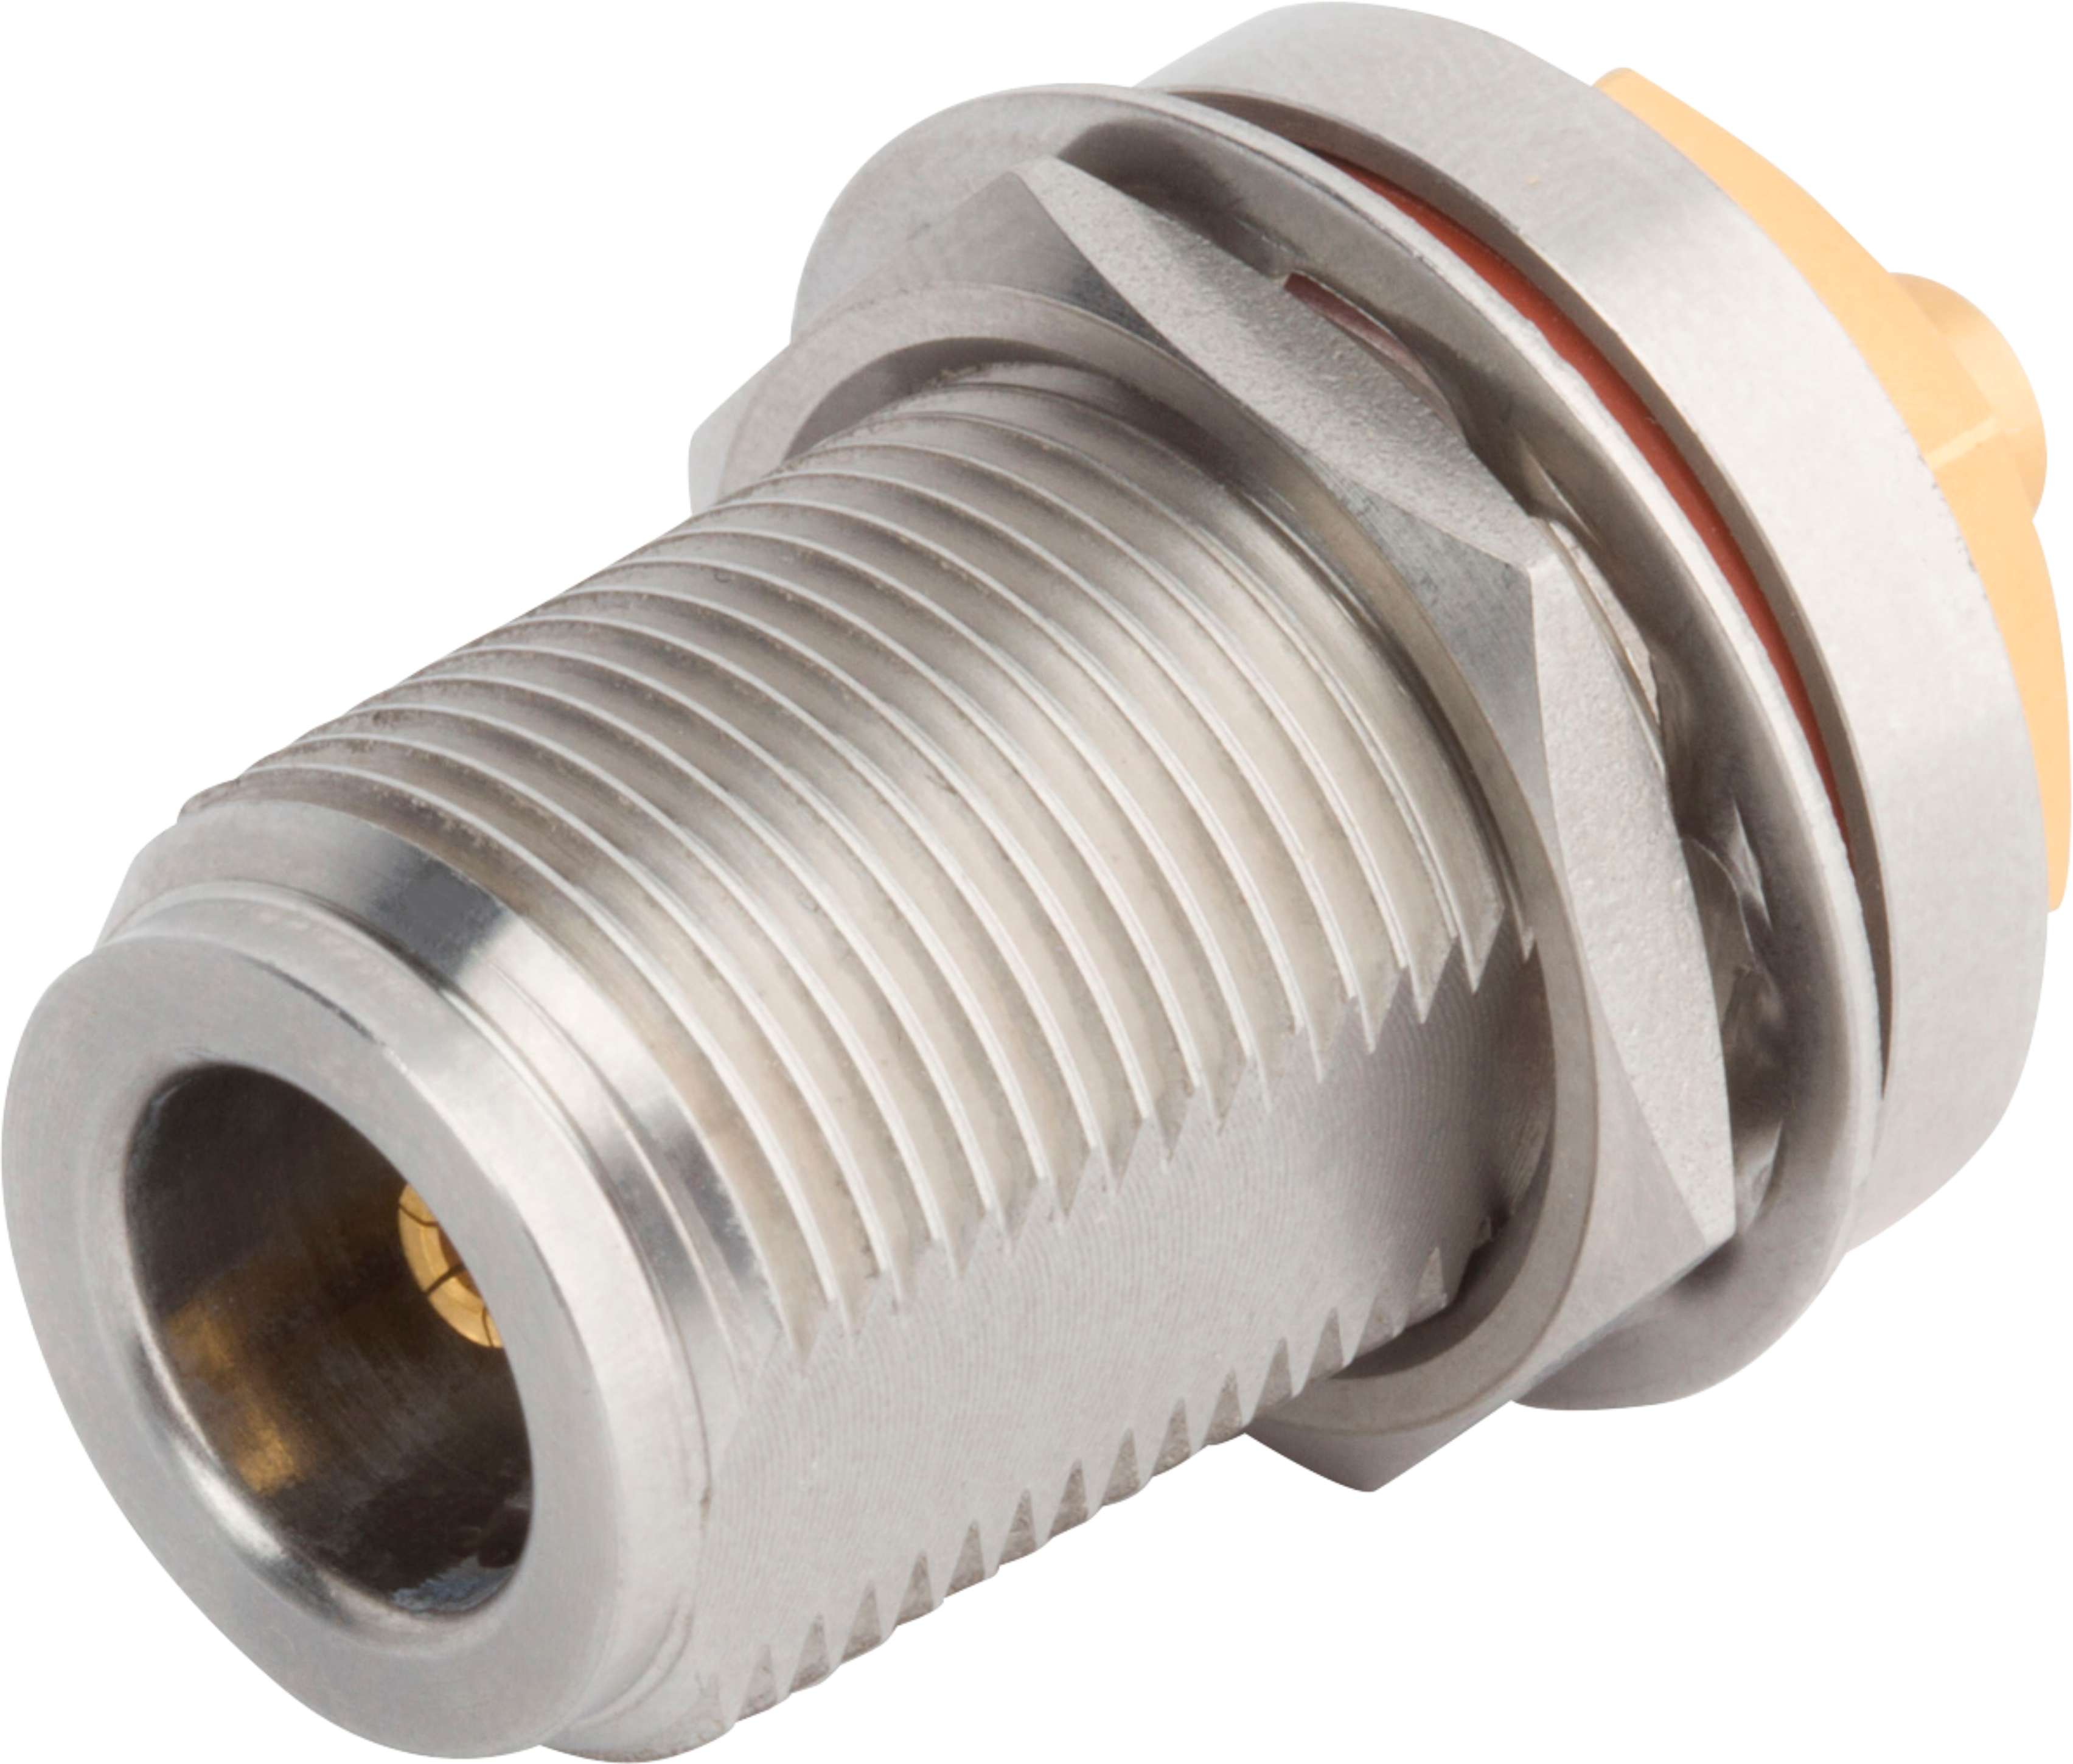 PN Female Bulkhead Connector for .085 Cable, SF6545-6017